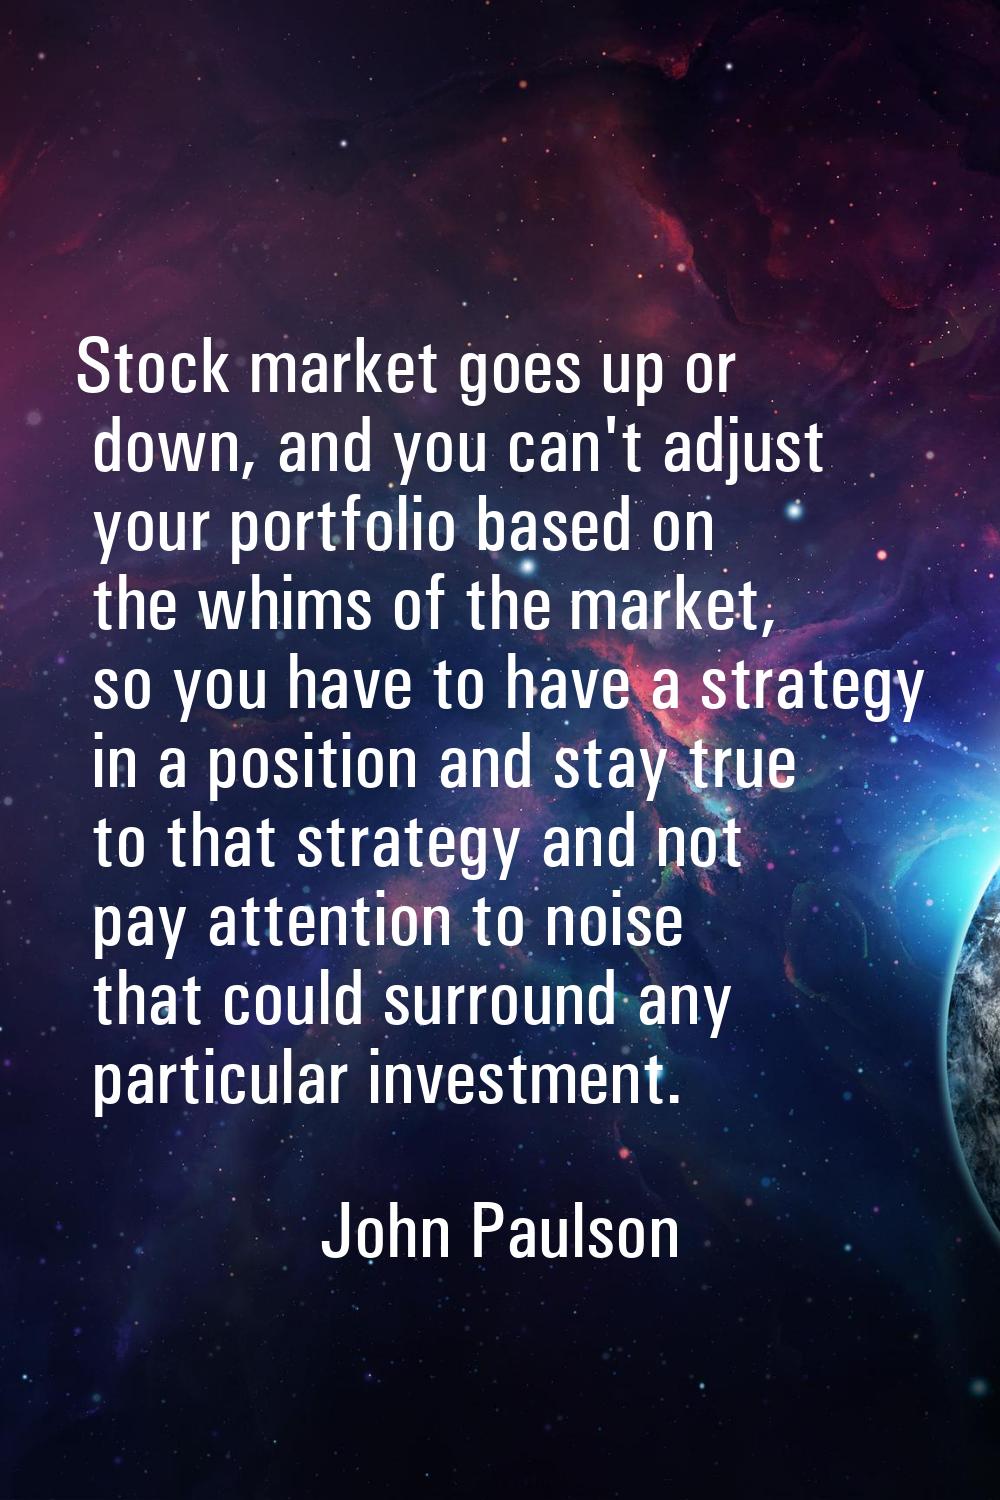 Stock market goes up or down, and you can't adjust your portfolio based on the whims of the market,